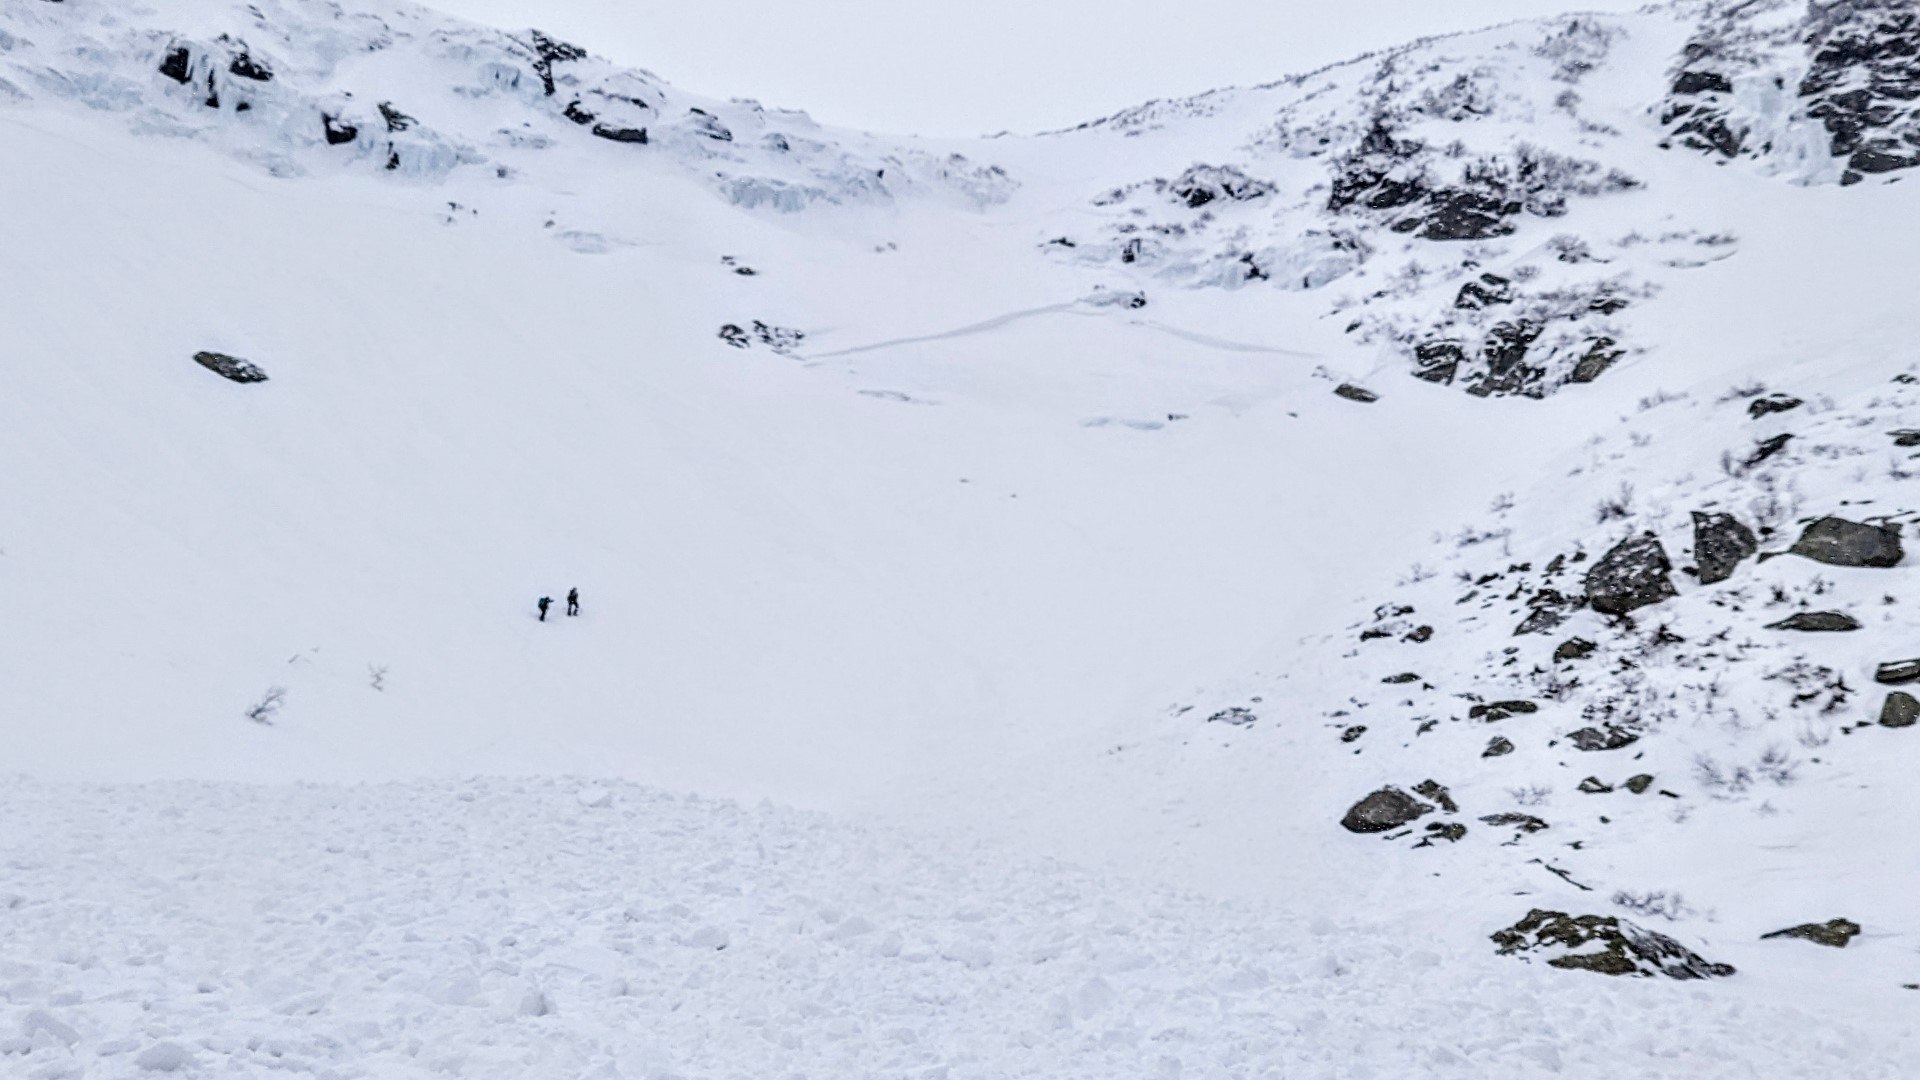 The snowboarder was coming down Tuckerman's Ravine, a popular slope for backcountry skiers and snowboarders.